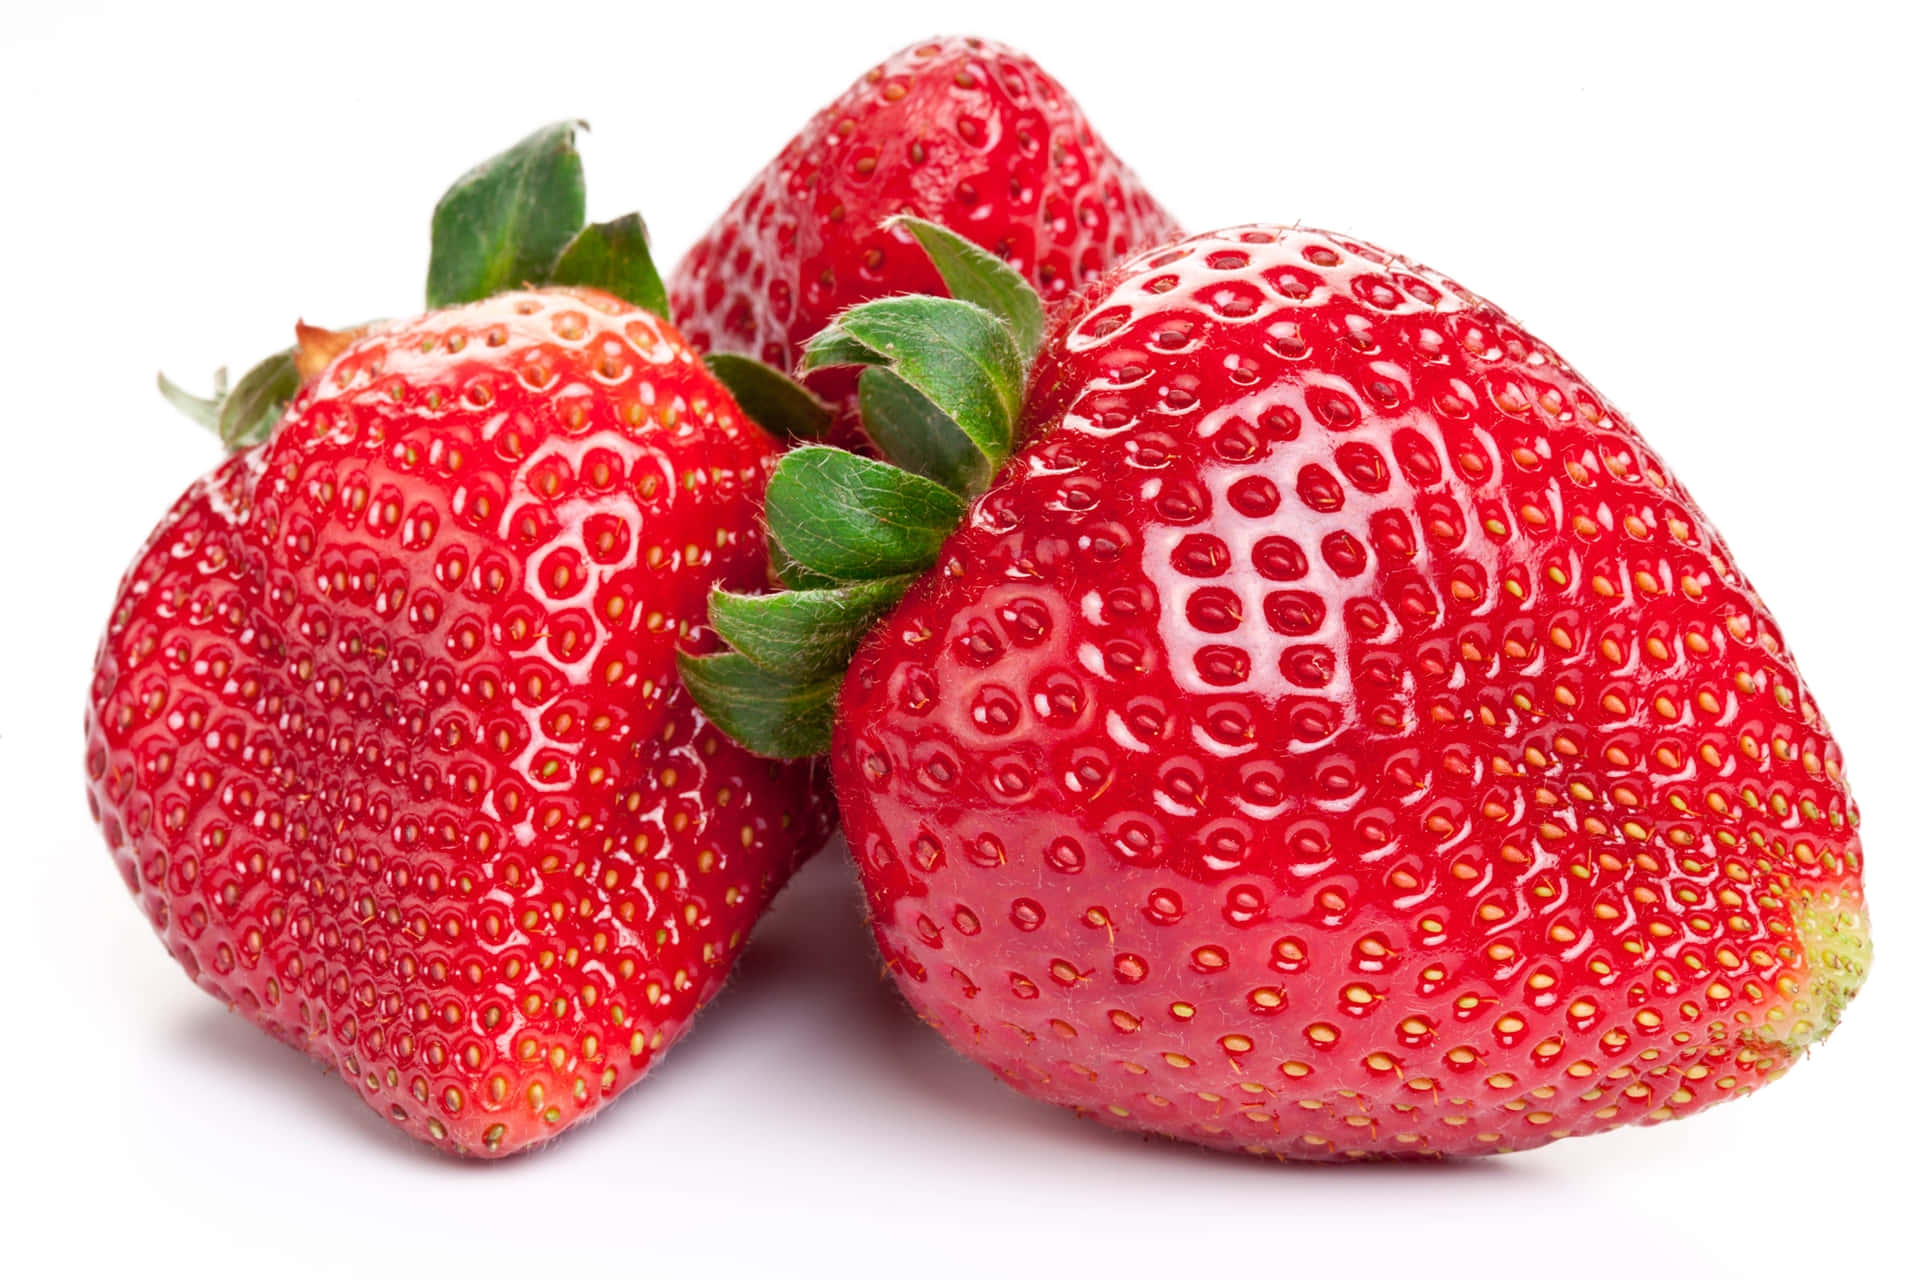 Enjoy a bowl of delicious and healthy strawberries!